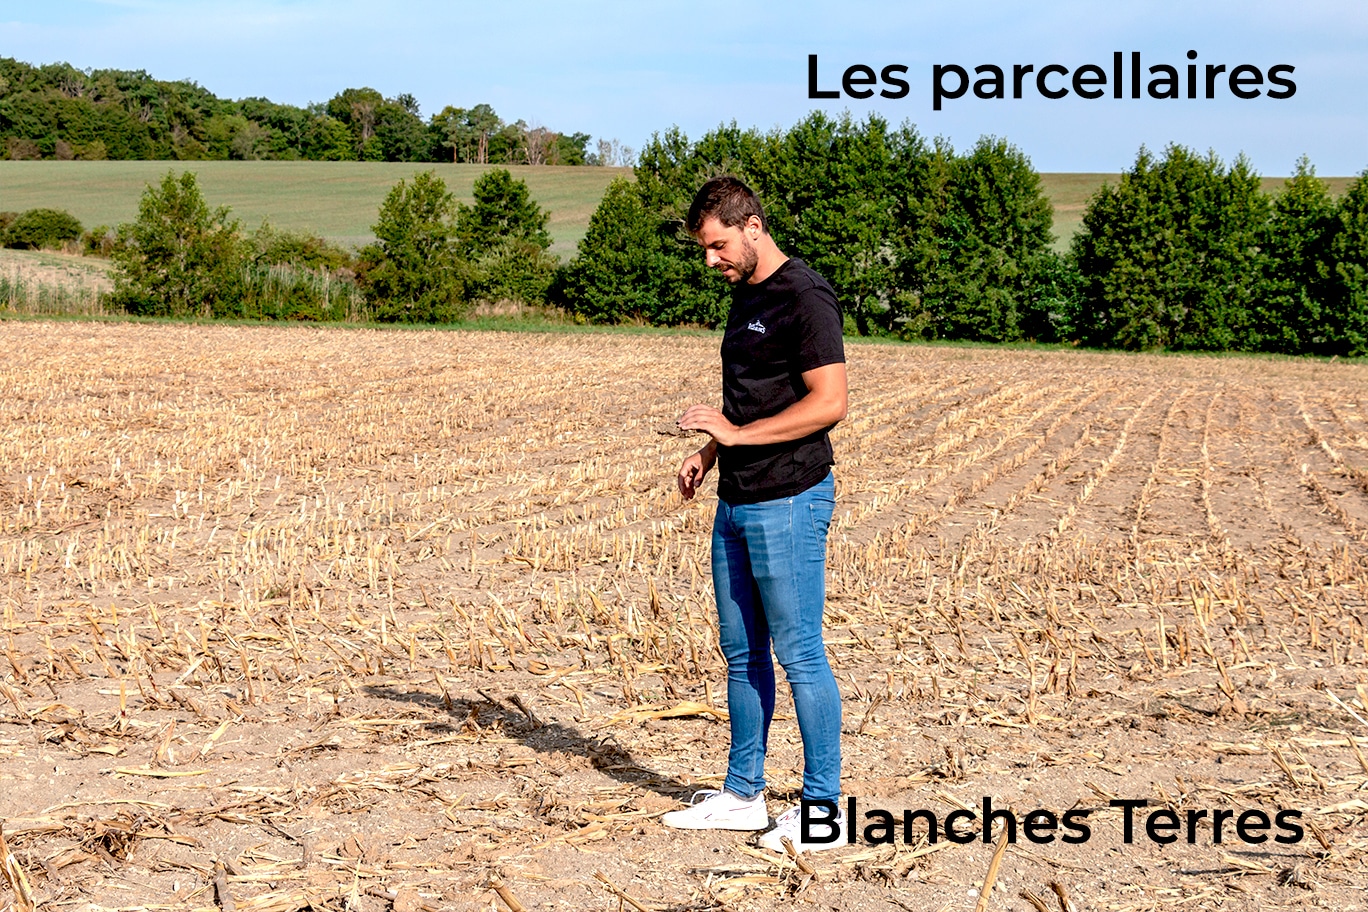 terres-blanches-parcellaires-whisky-rozelieures